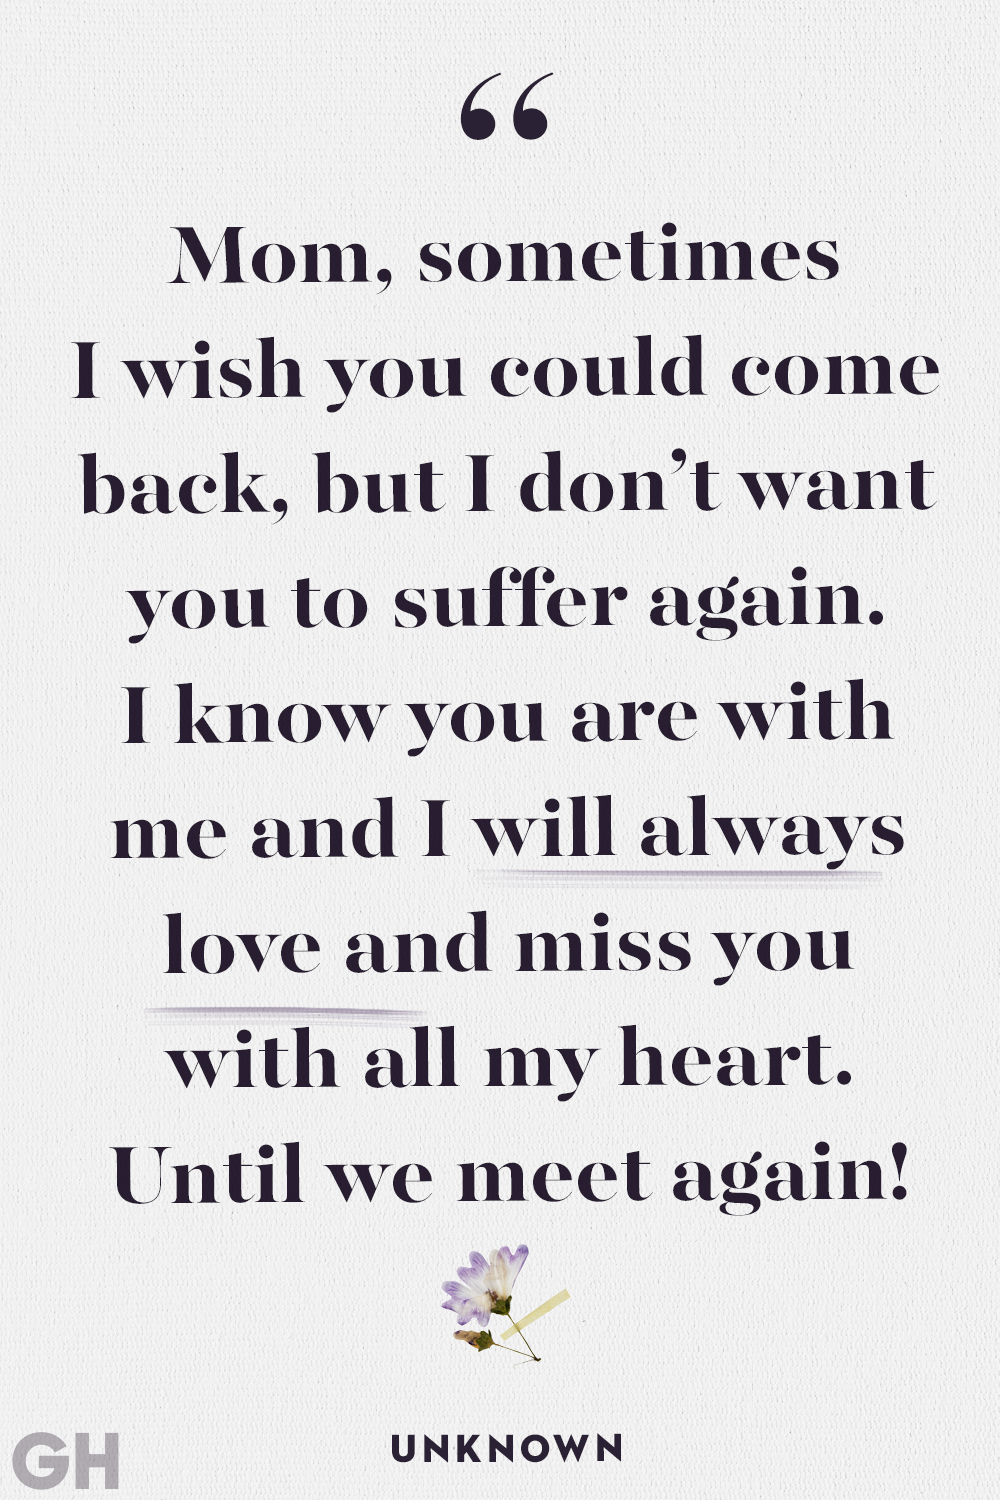 missing someone who died quotes and sayings